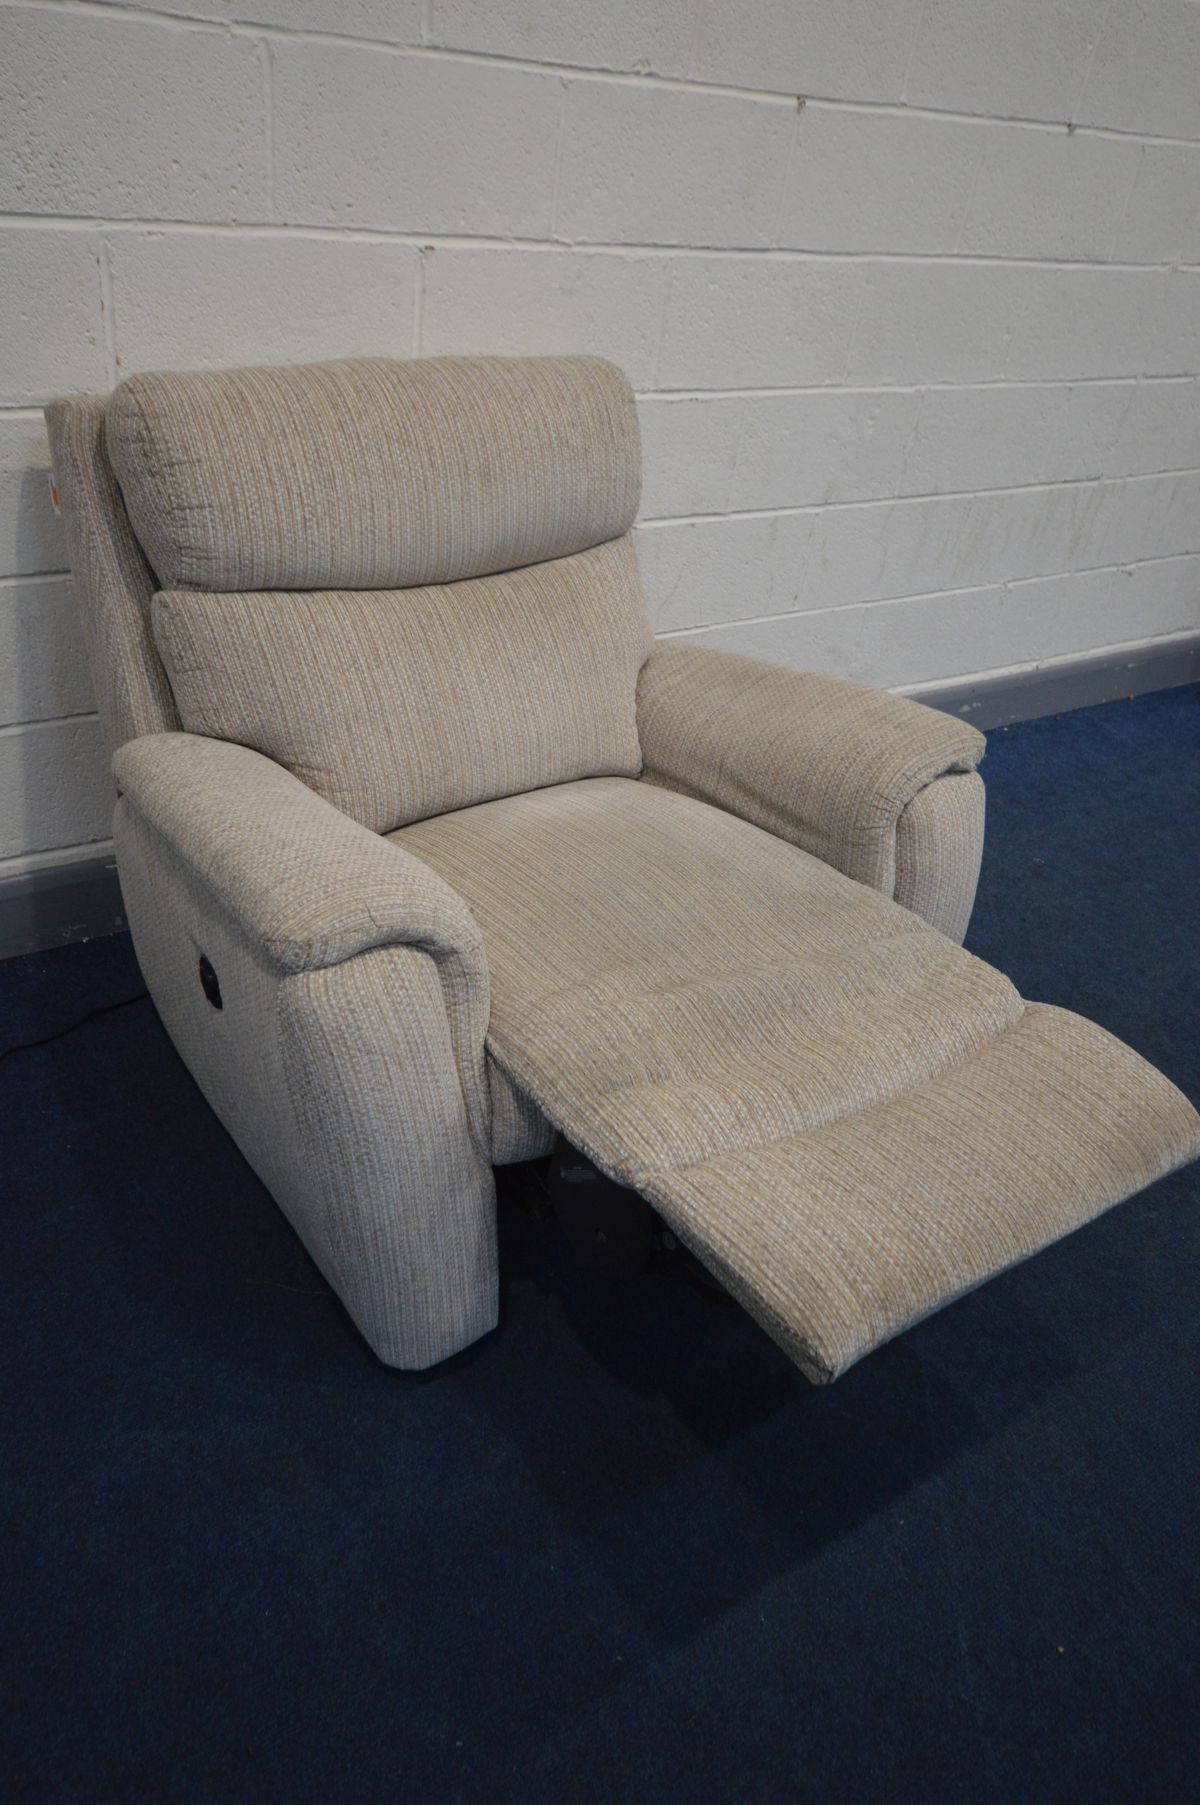 A LA-Z-BOY CREAM UPHOLSTERED ELECTRIC RECLINING ARMCHAIR - Image 2 of 2